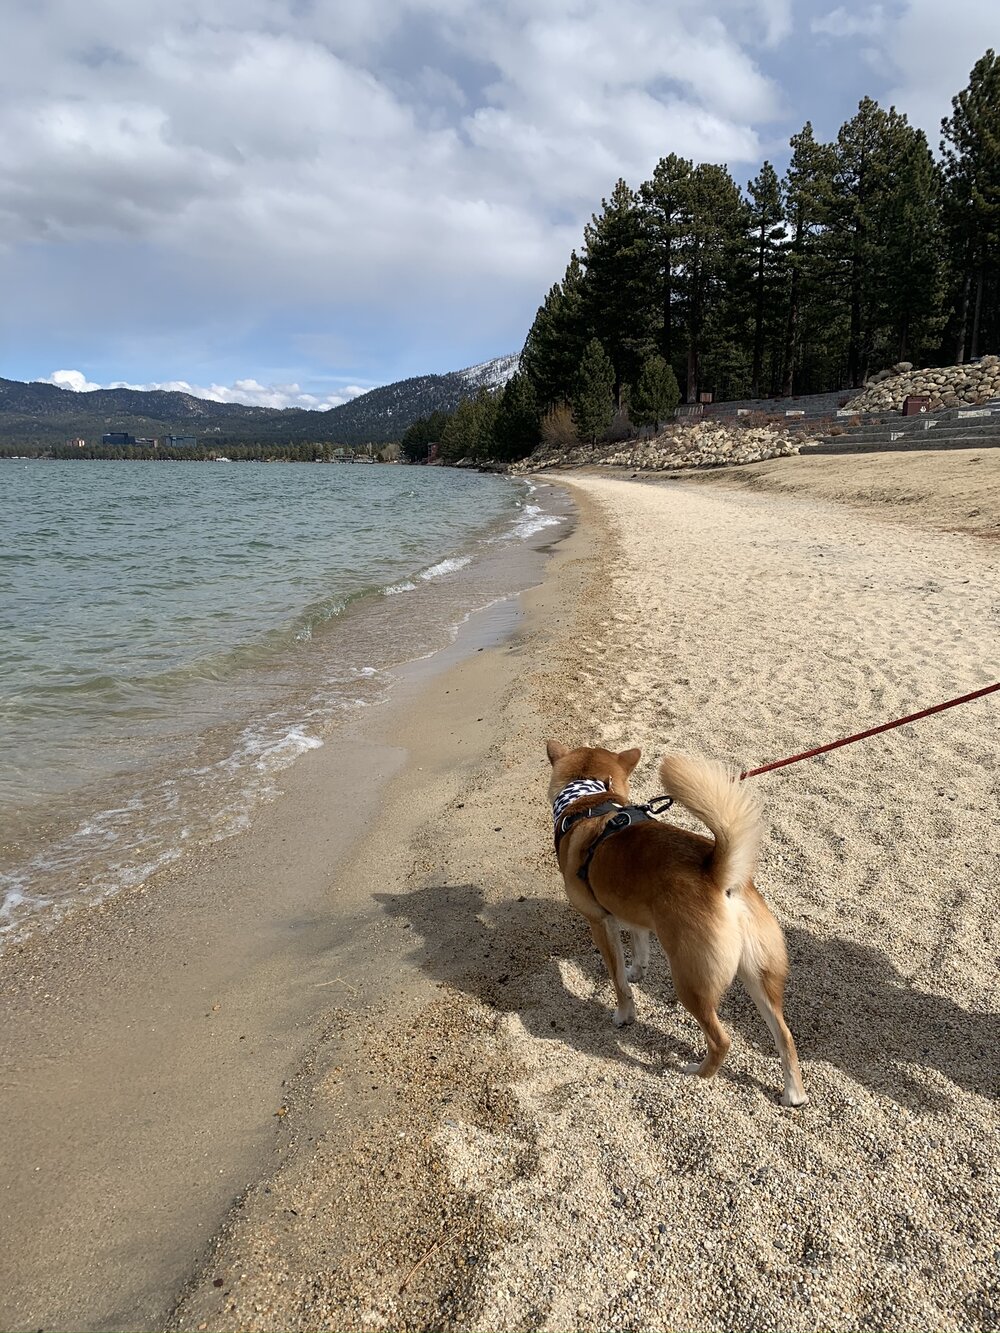 are dogs allowed at lakeviev state park